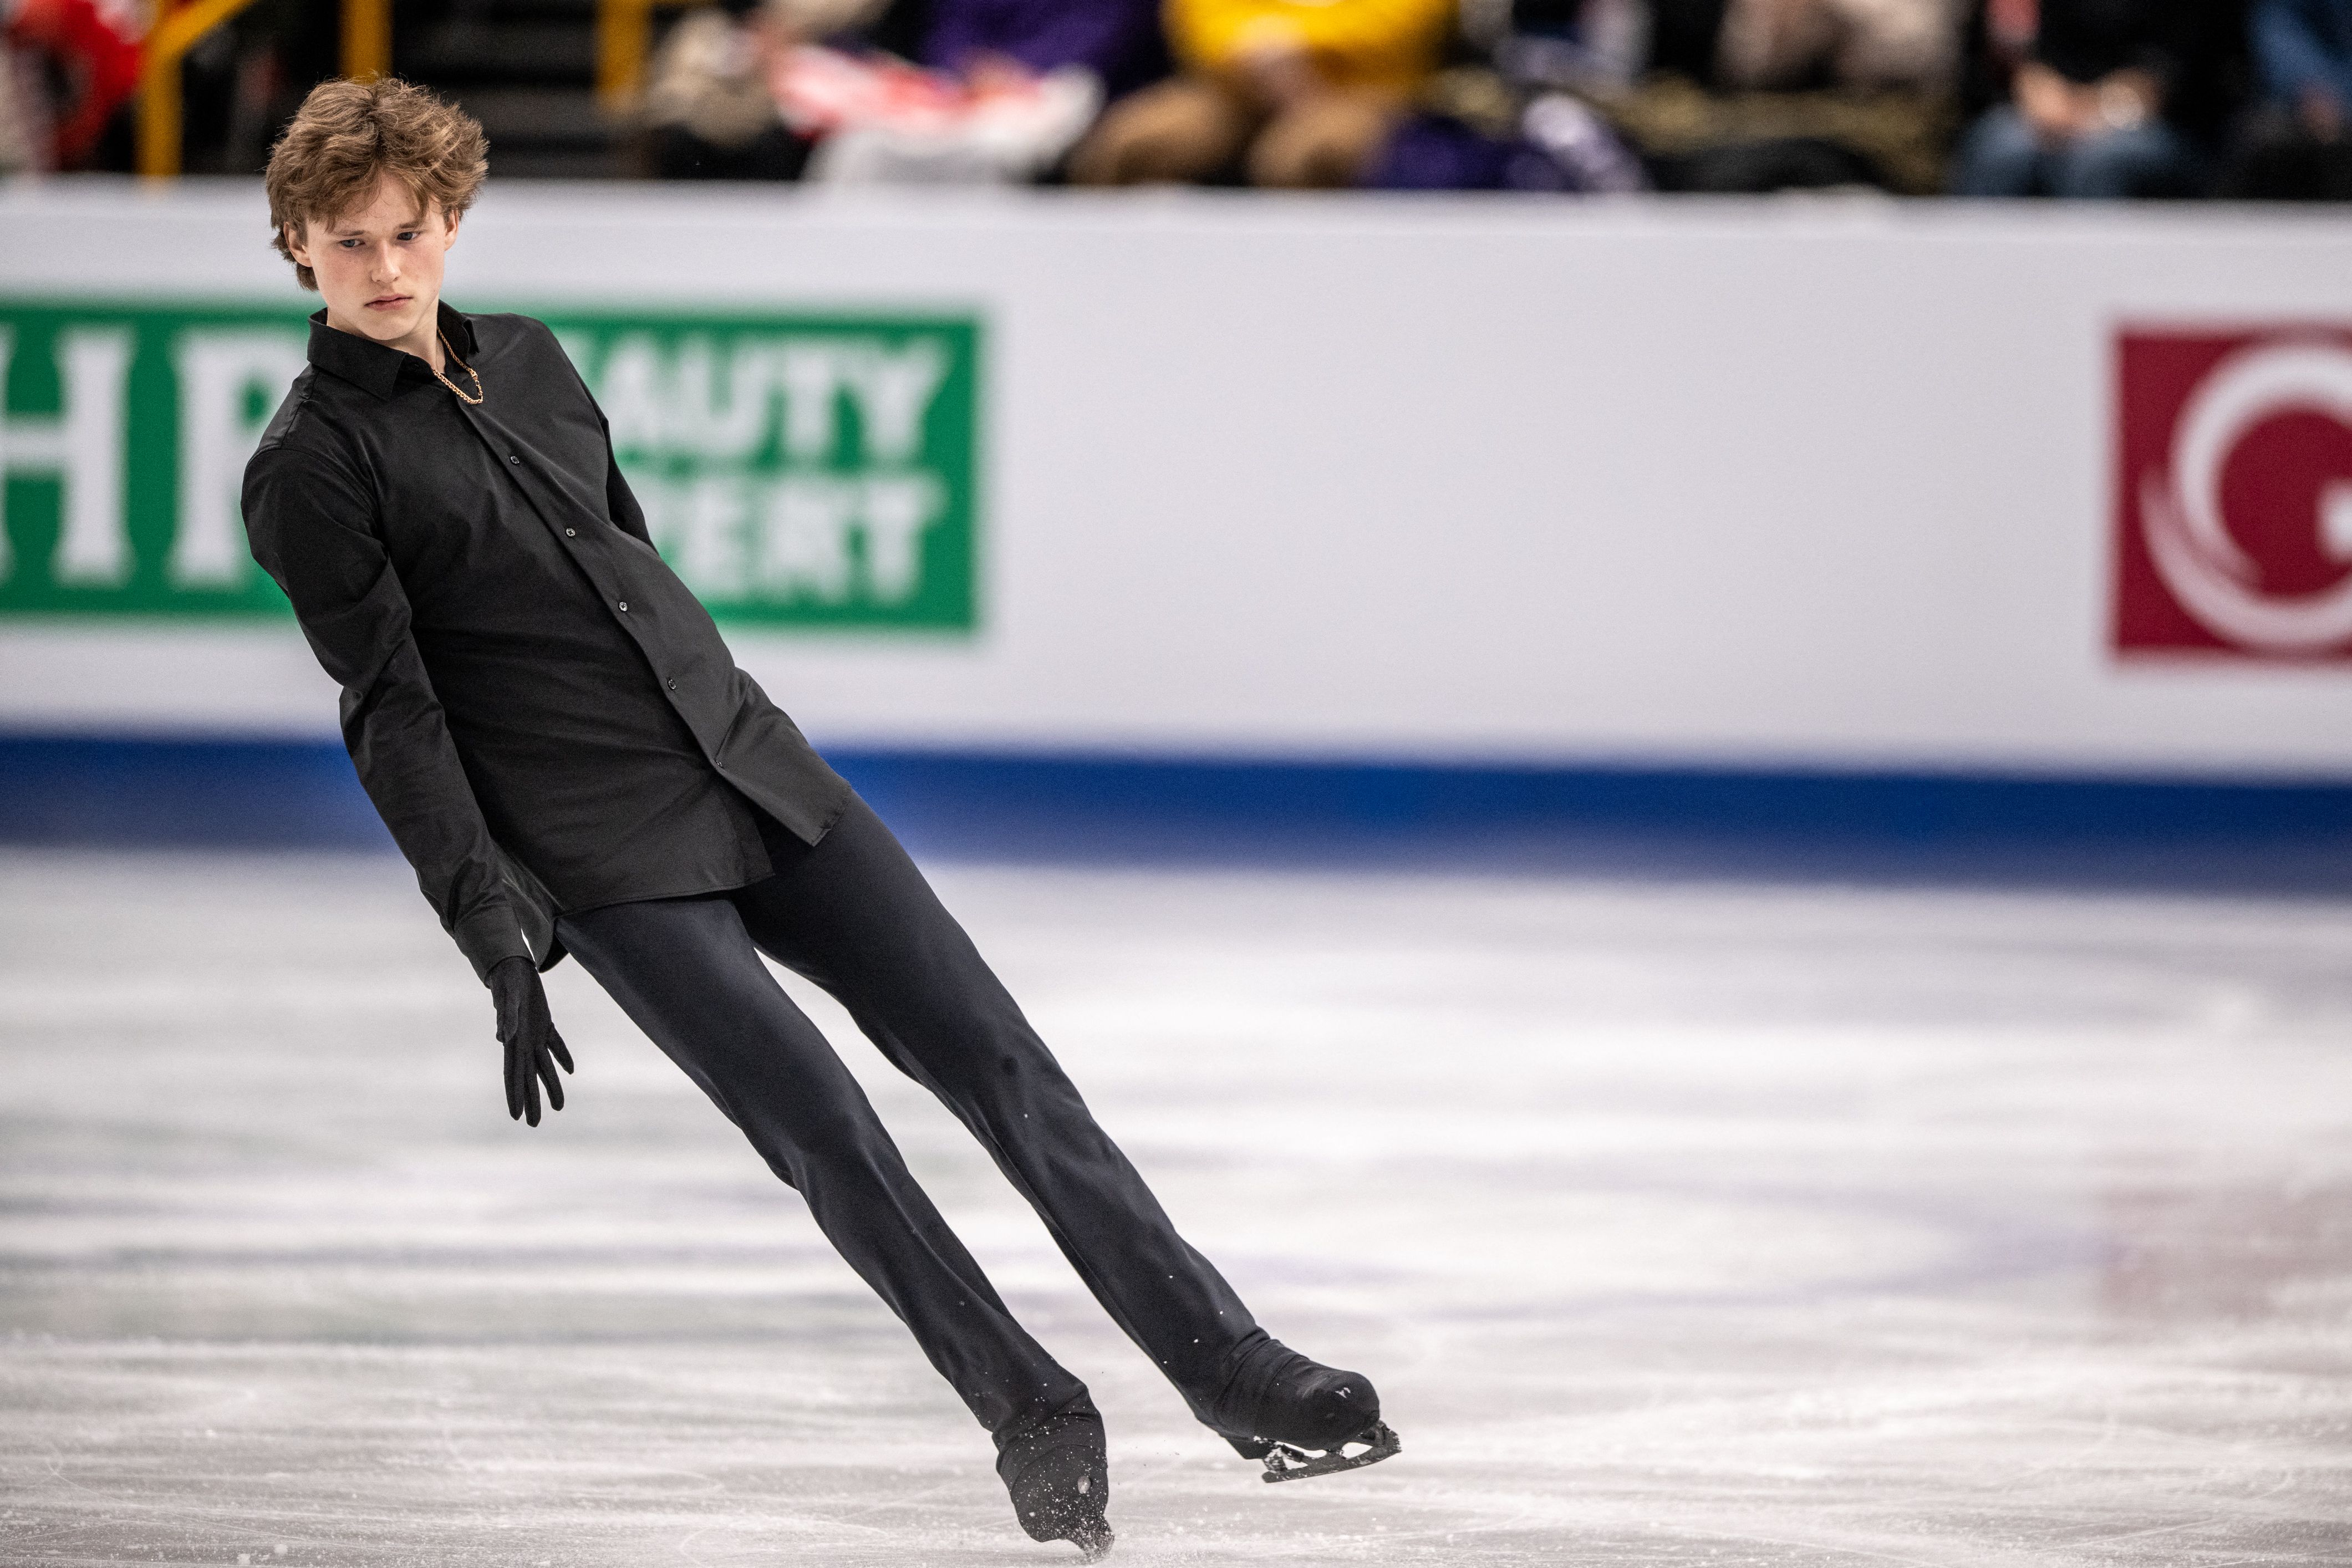 Shoma Uno leads Ilia Malinin after mens short program in world figure skating competition